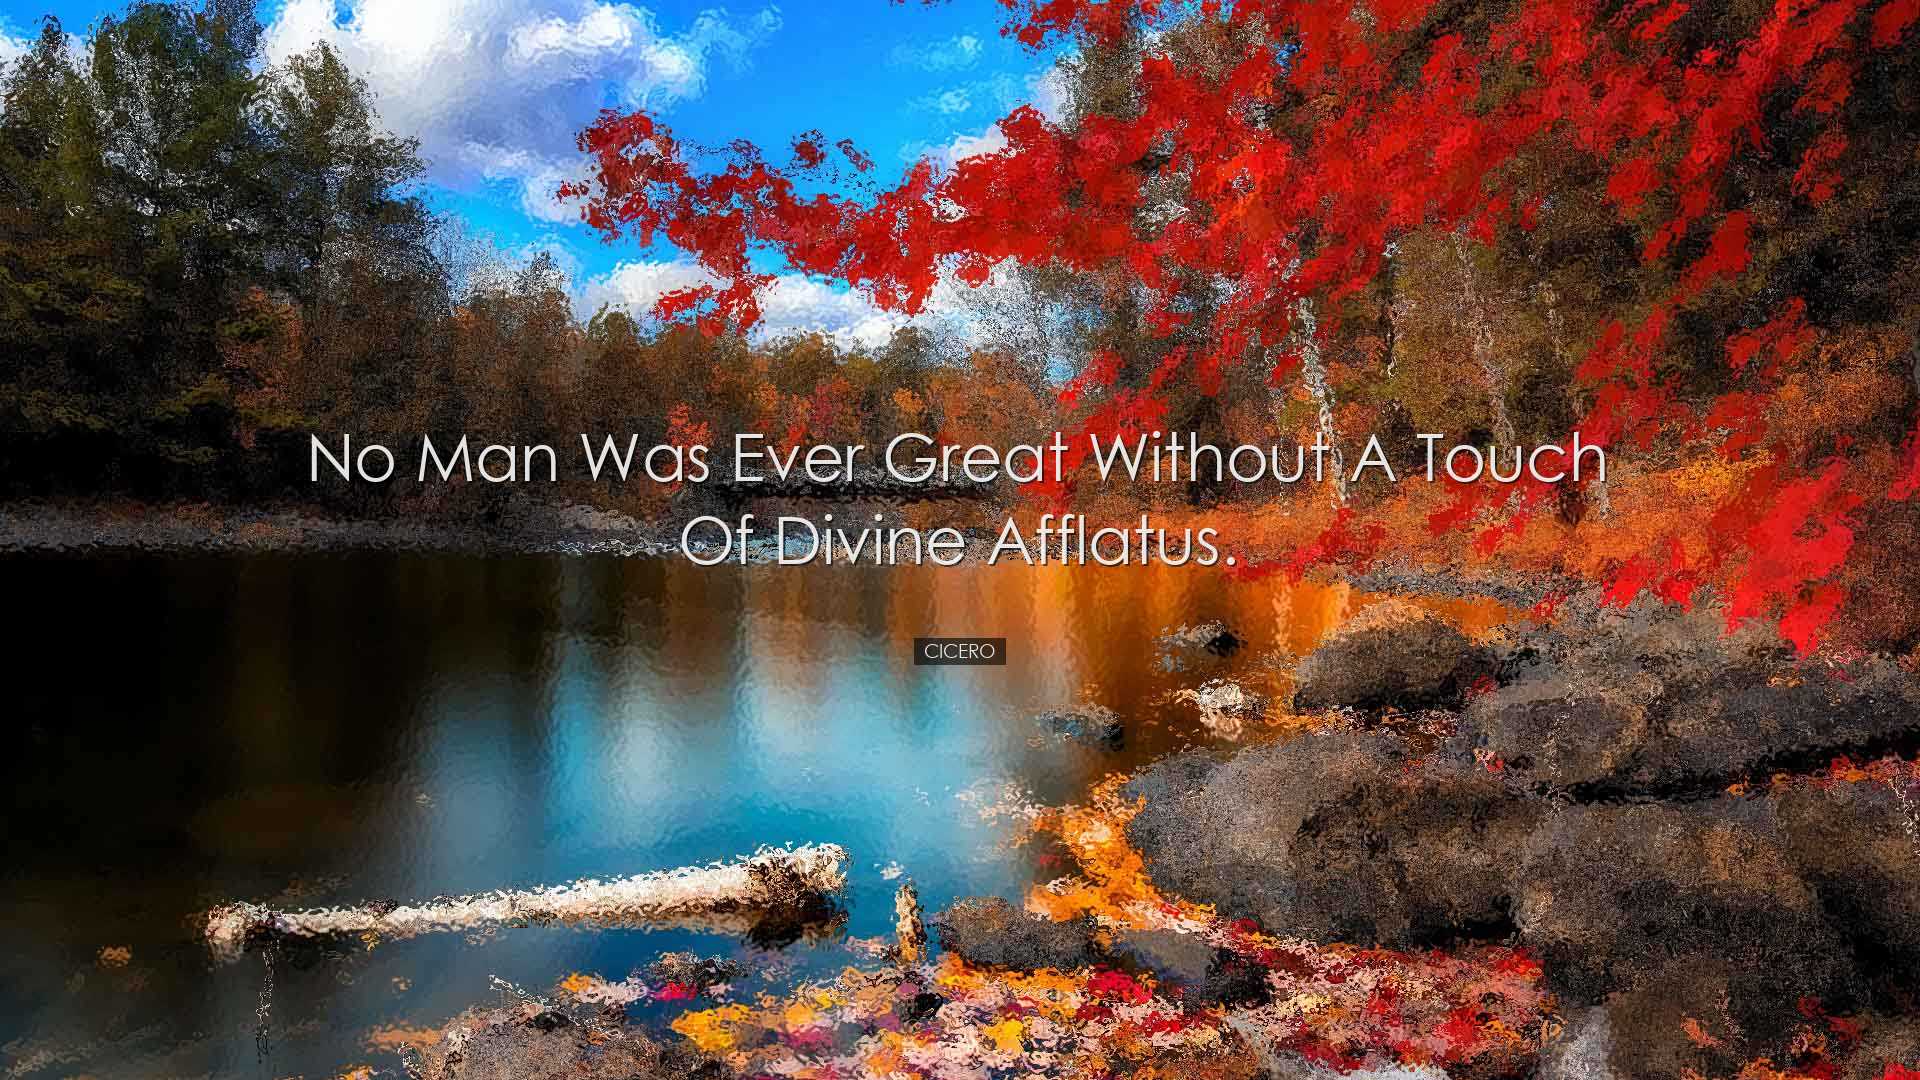 No man was ever great without a touch of divine afflatus. - Cicero